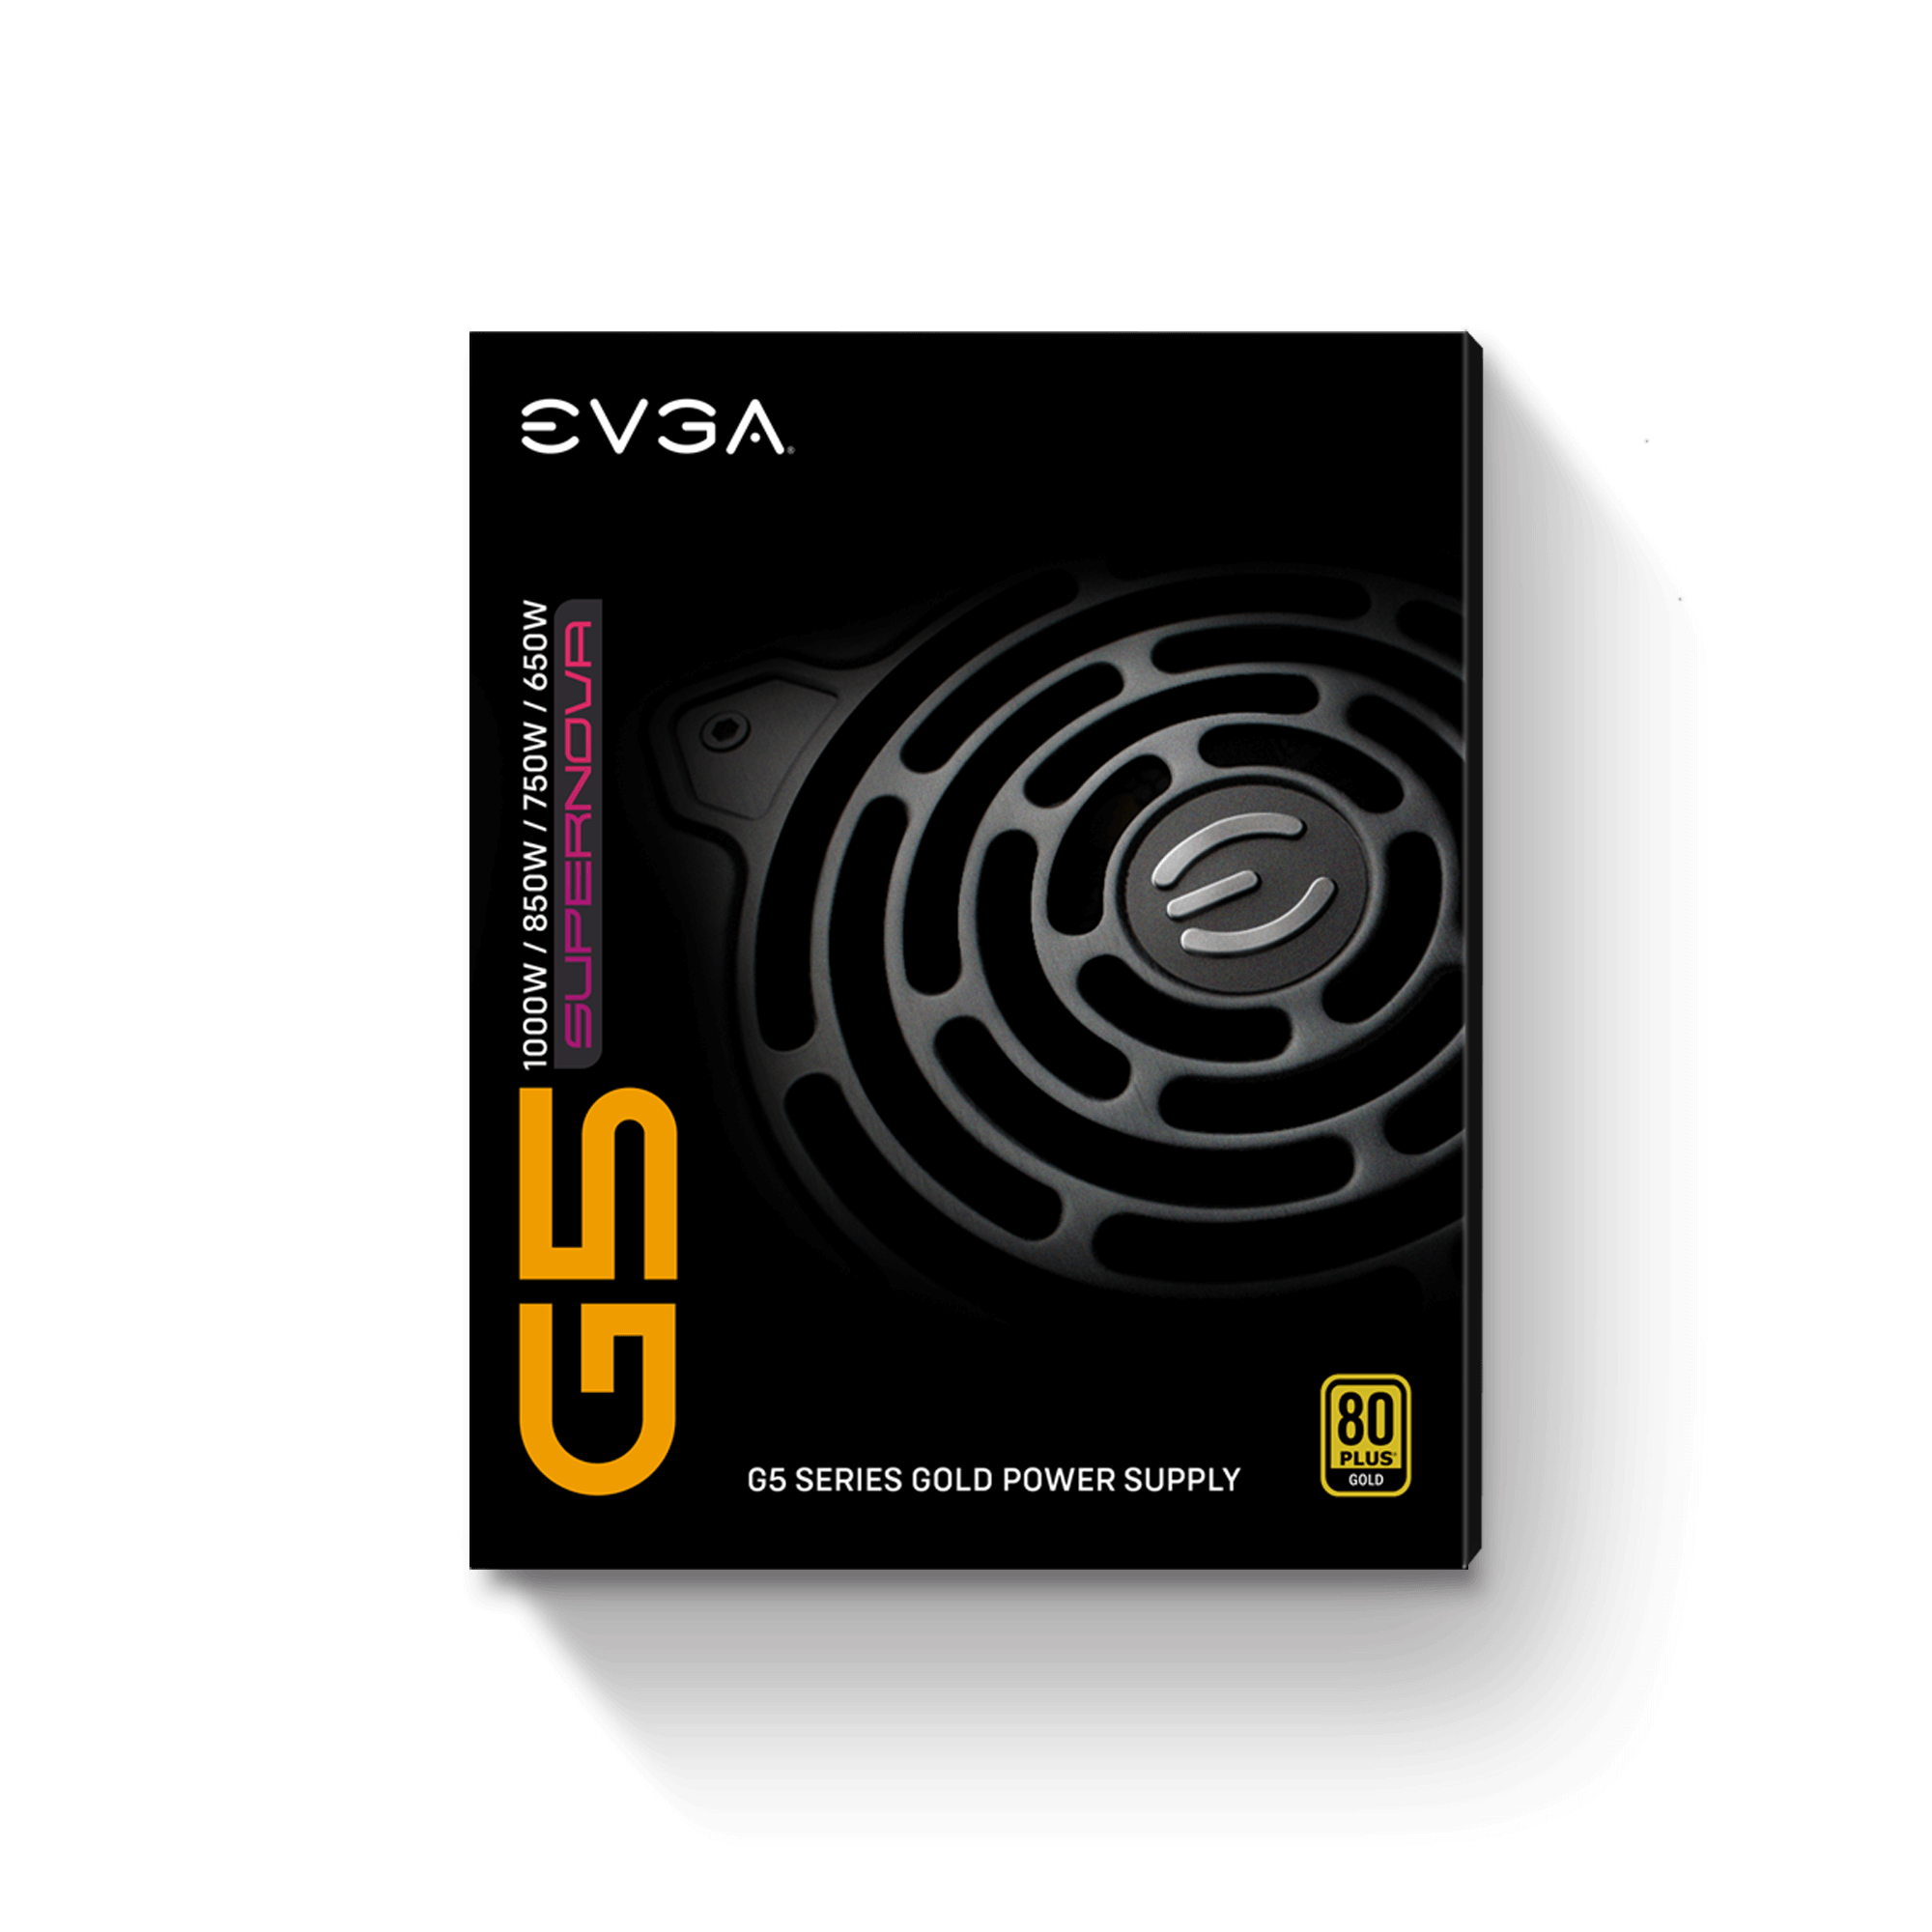 EVGA - Products - EVGA SuperNOVA 750 G5, 80 Plus Gold 750W, Fully Modular,  Eco Mode with FDB Fan, 10 Year Warranty, Includes Power ON Self Tester,  Compact 150mm Size, Power Supply 220-G5-0750-X1 - 220-G5-0750-X1